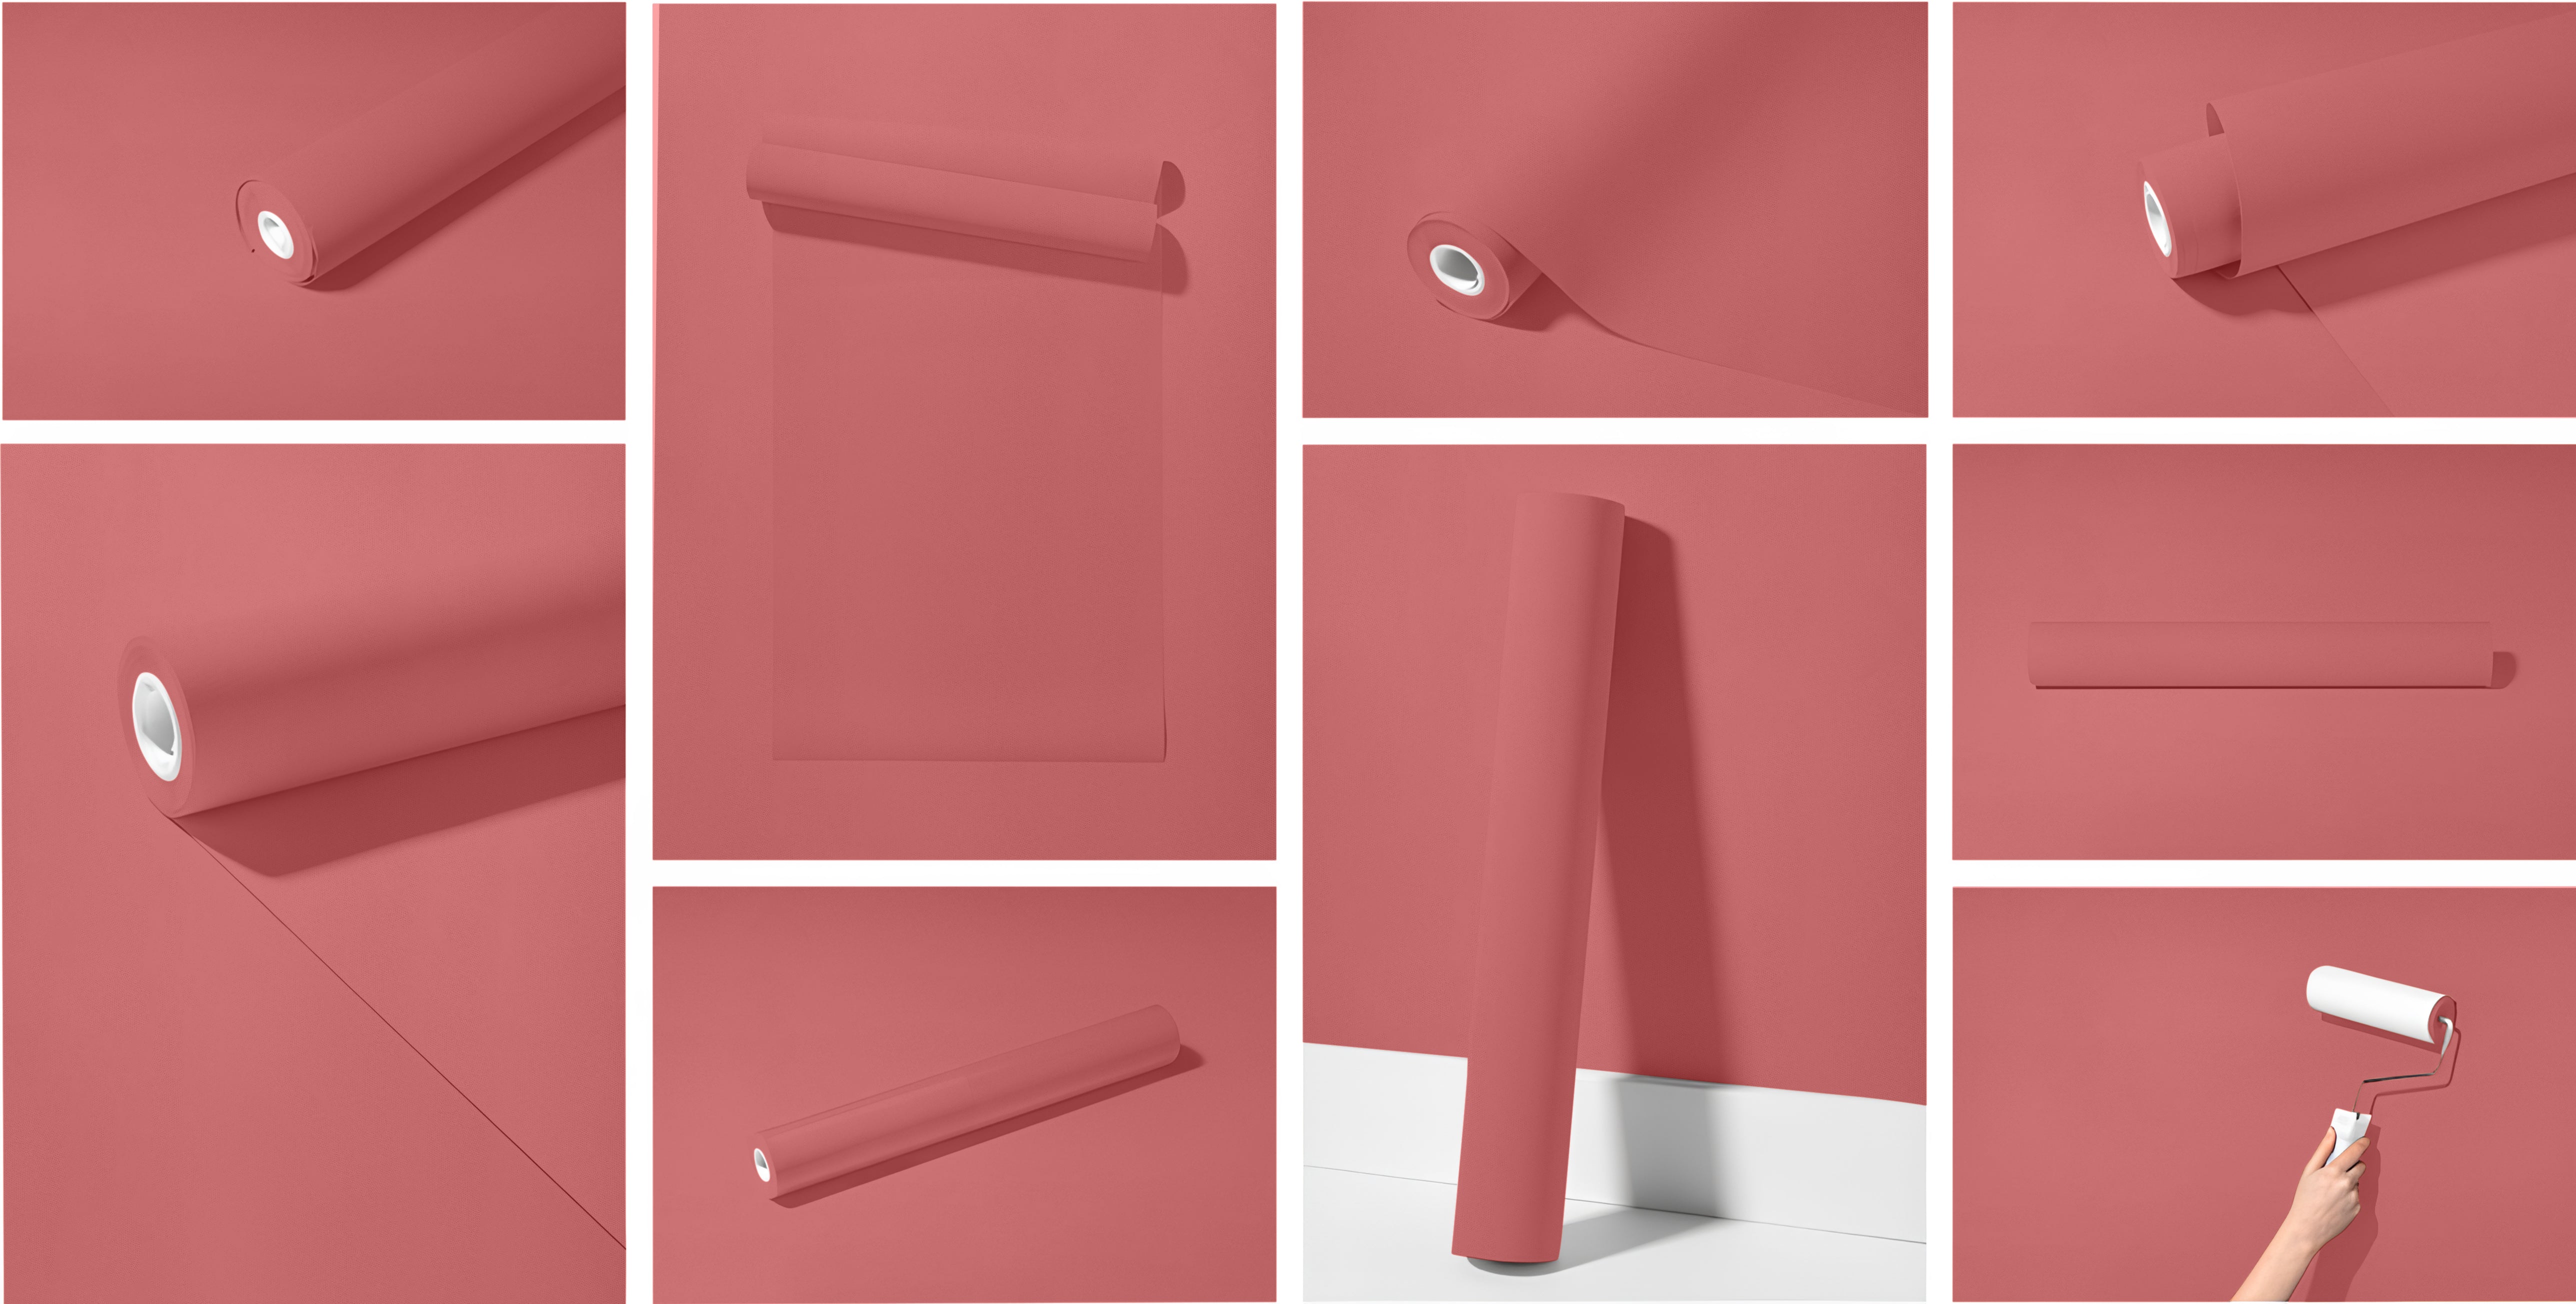 Peel & Stick Removable Re-usable Paint - Color RAL 3014 Antique Pink - offRAL™ - RALRAW LLC, USA